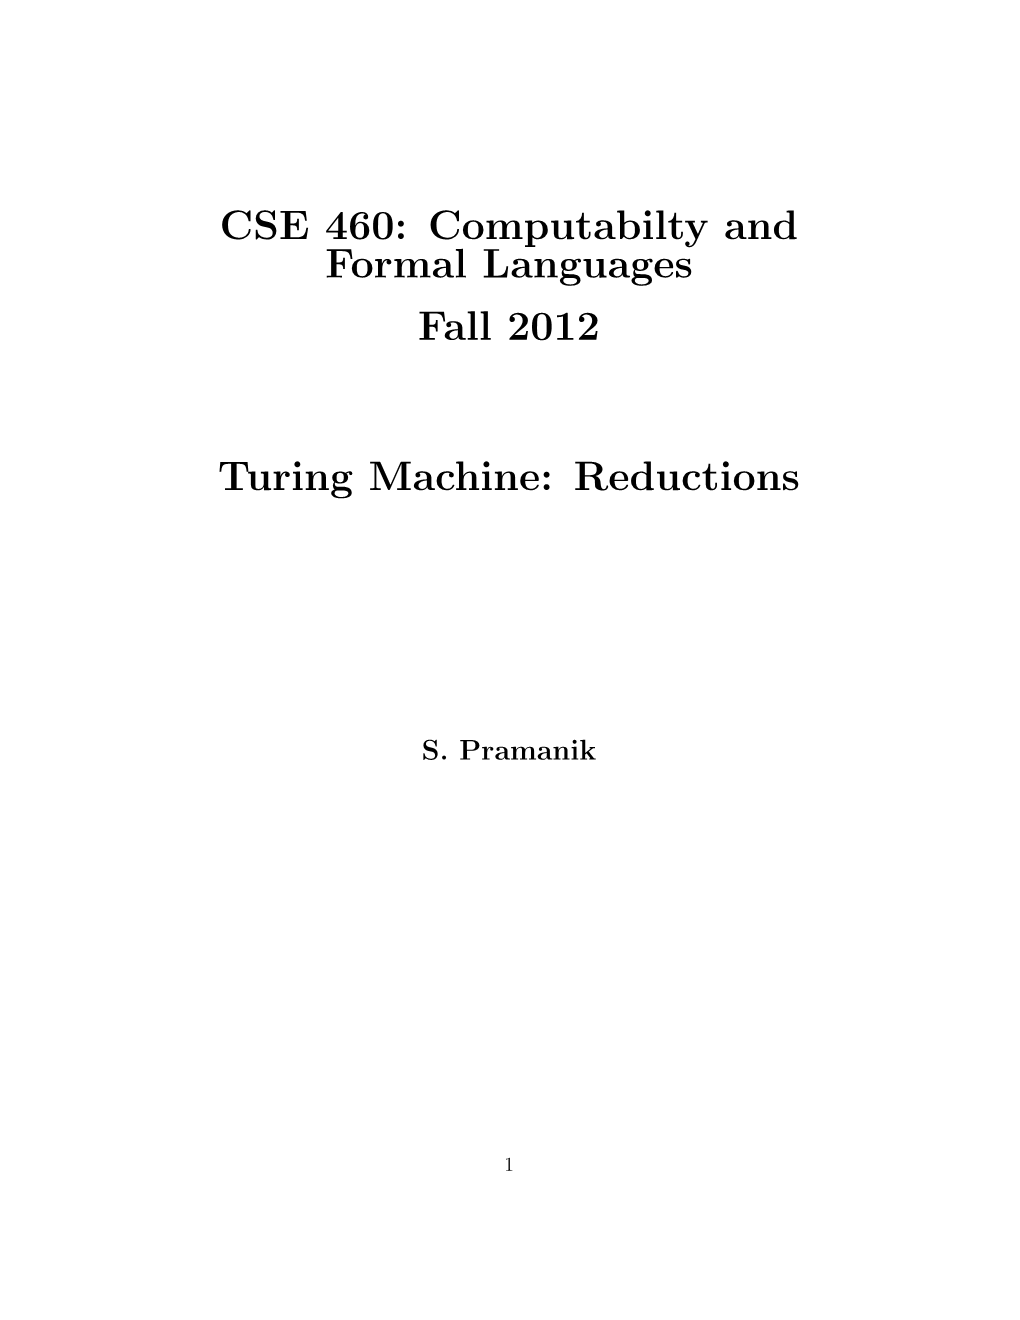 CSE 460: Computabilty and Formal Languages Fall 2012 Turing Machine: Reductions